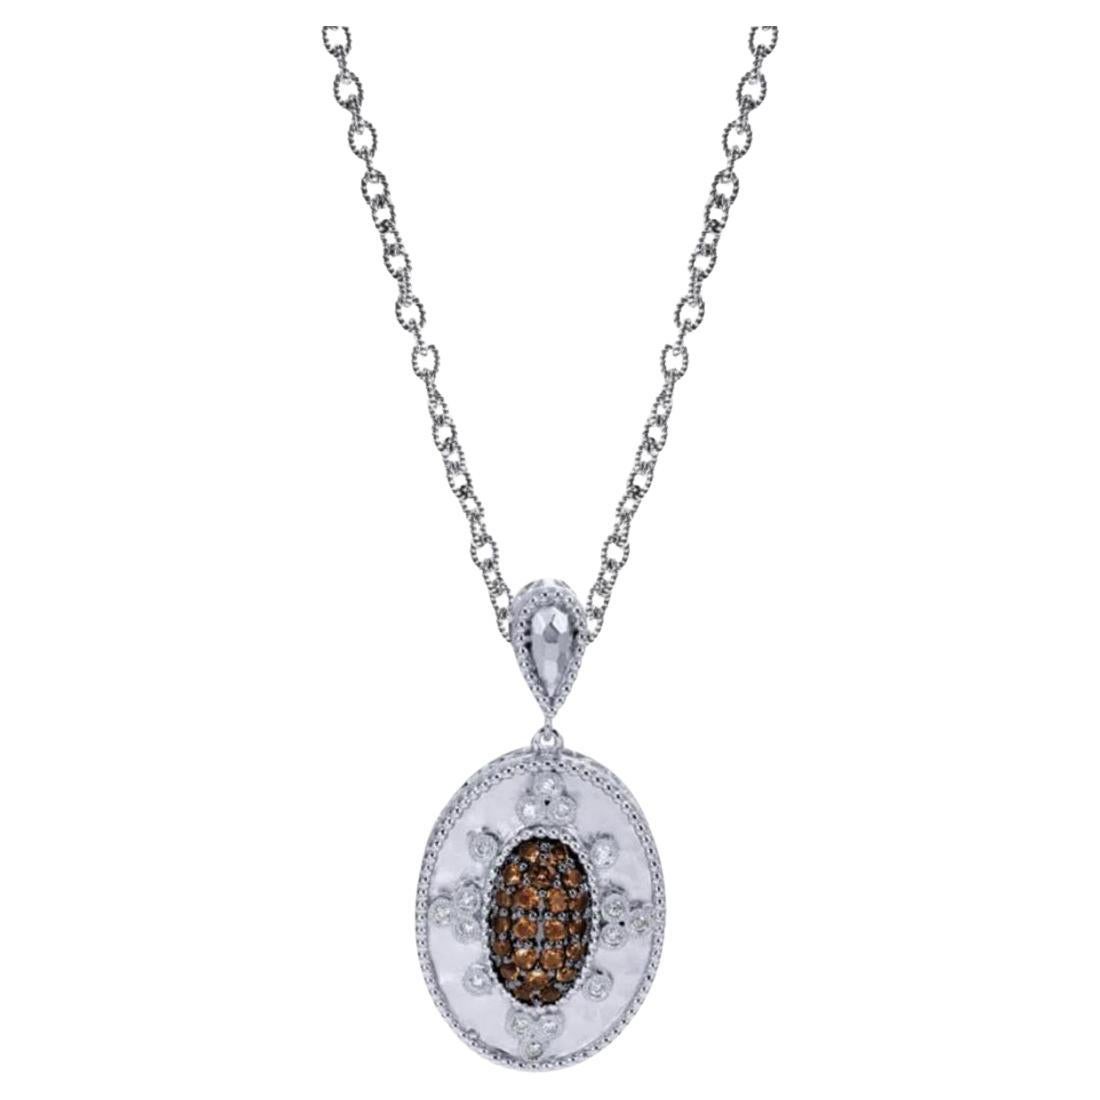   Sterling Silver, Diamonds and Smoky Topaz Pendant For Sale